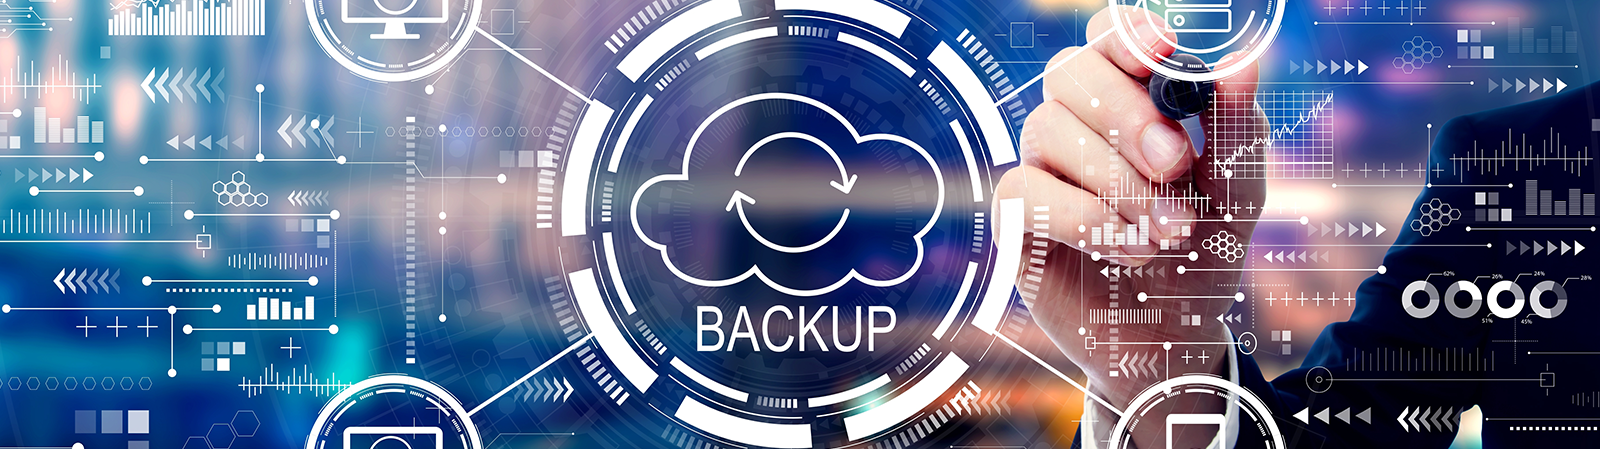 Industrial Control System Backup and Recovery